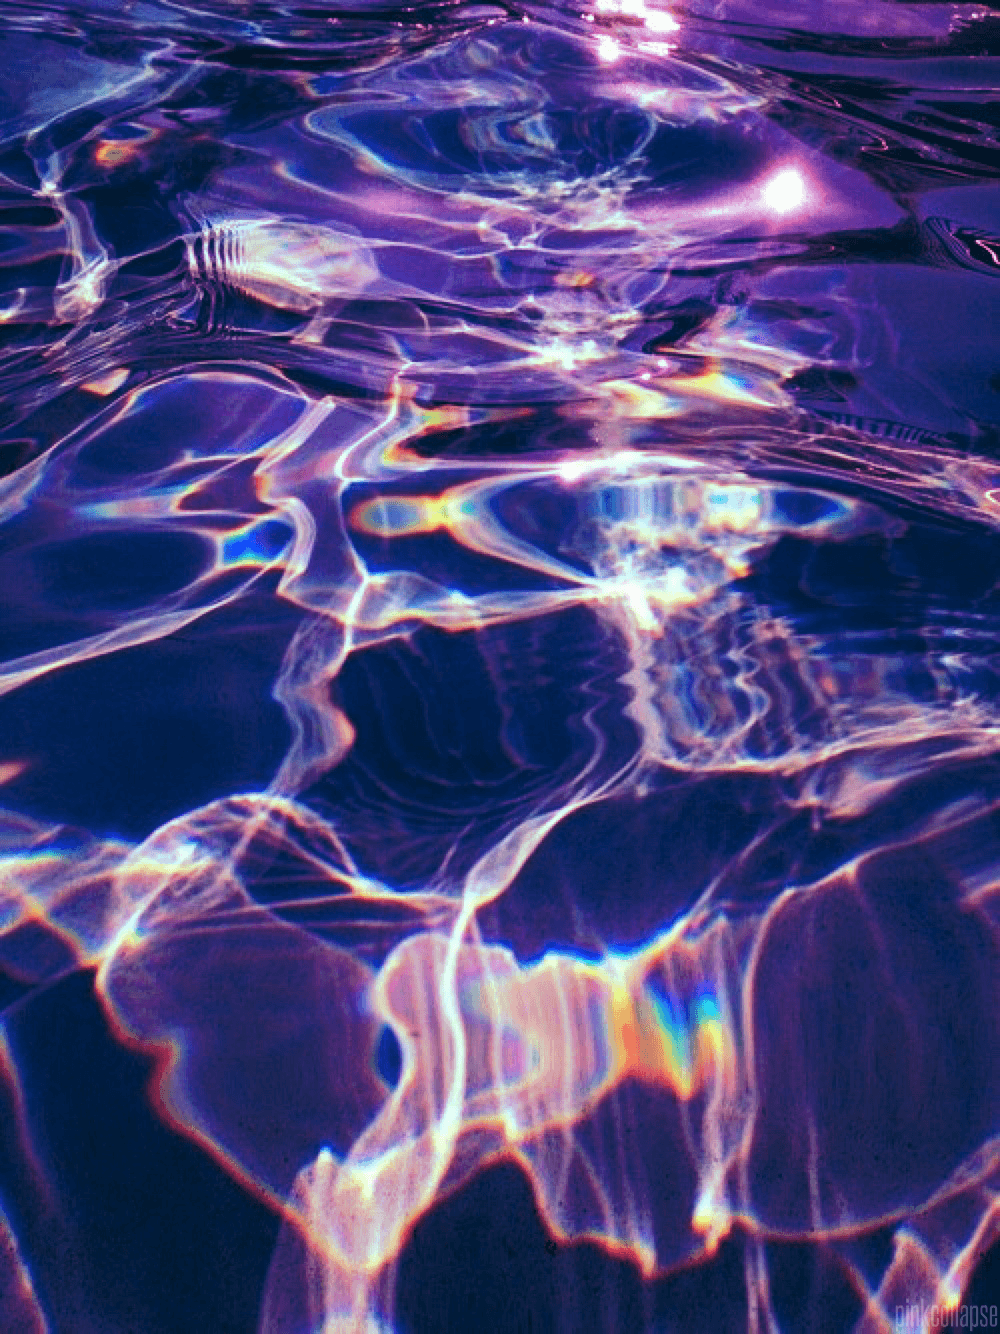 A purple water with light reflections on it - Water